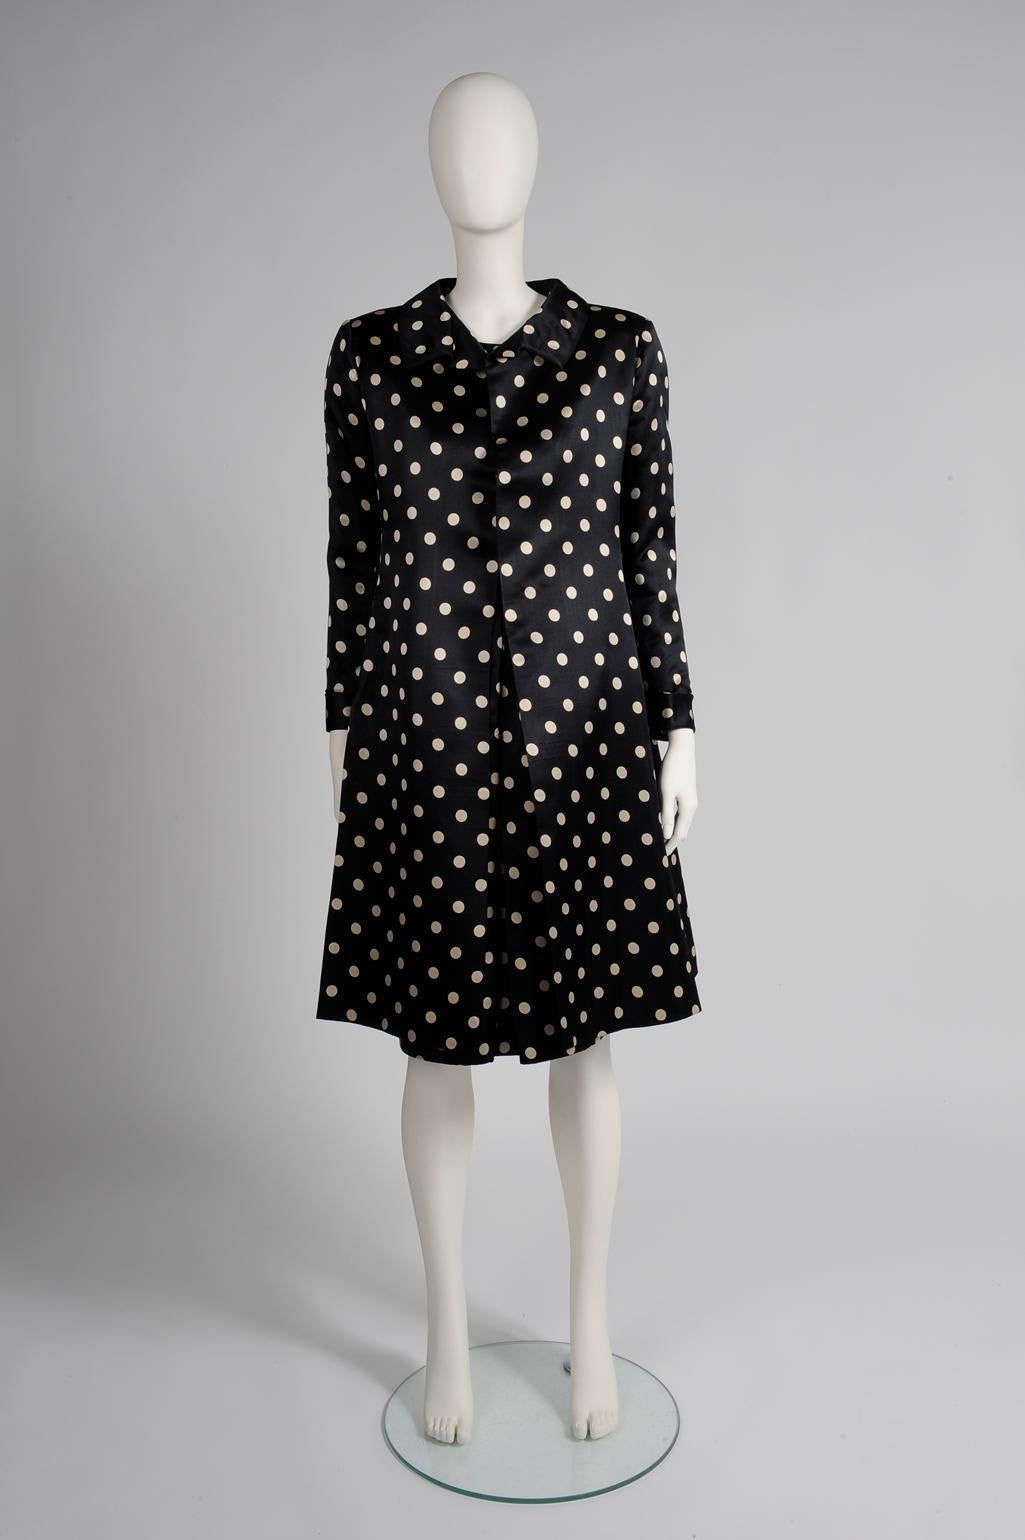 Wedding season is here and this early 60s Nina Ricci haute couture set is an elegant option for the ceremony. Made from refined satin silk printed with contrasting off-white polka dots on black background, both dress and coat finish just under the